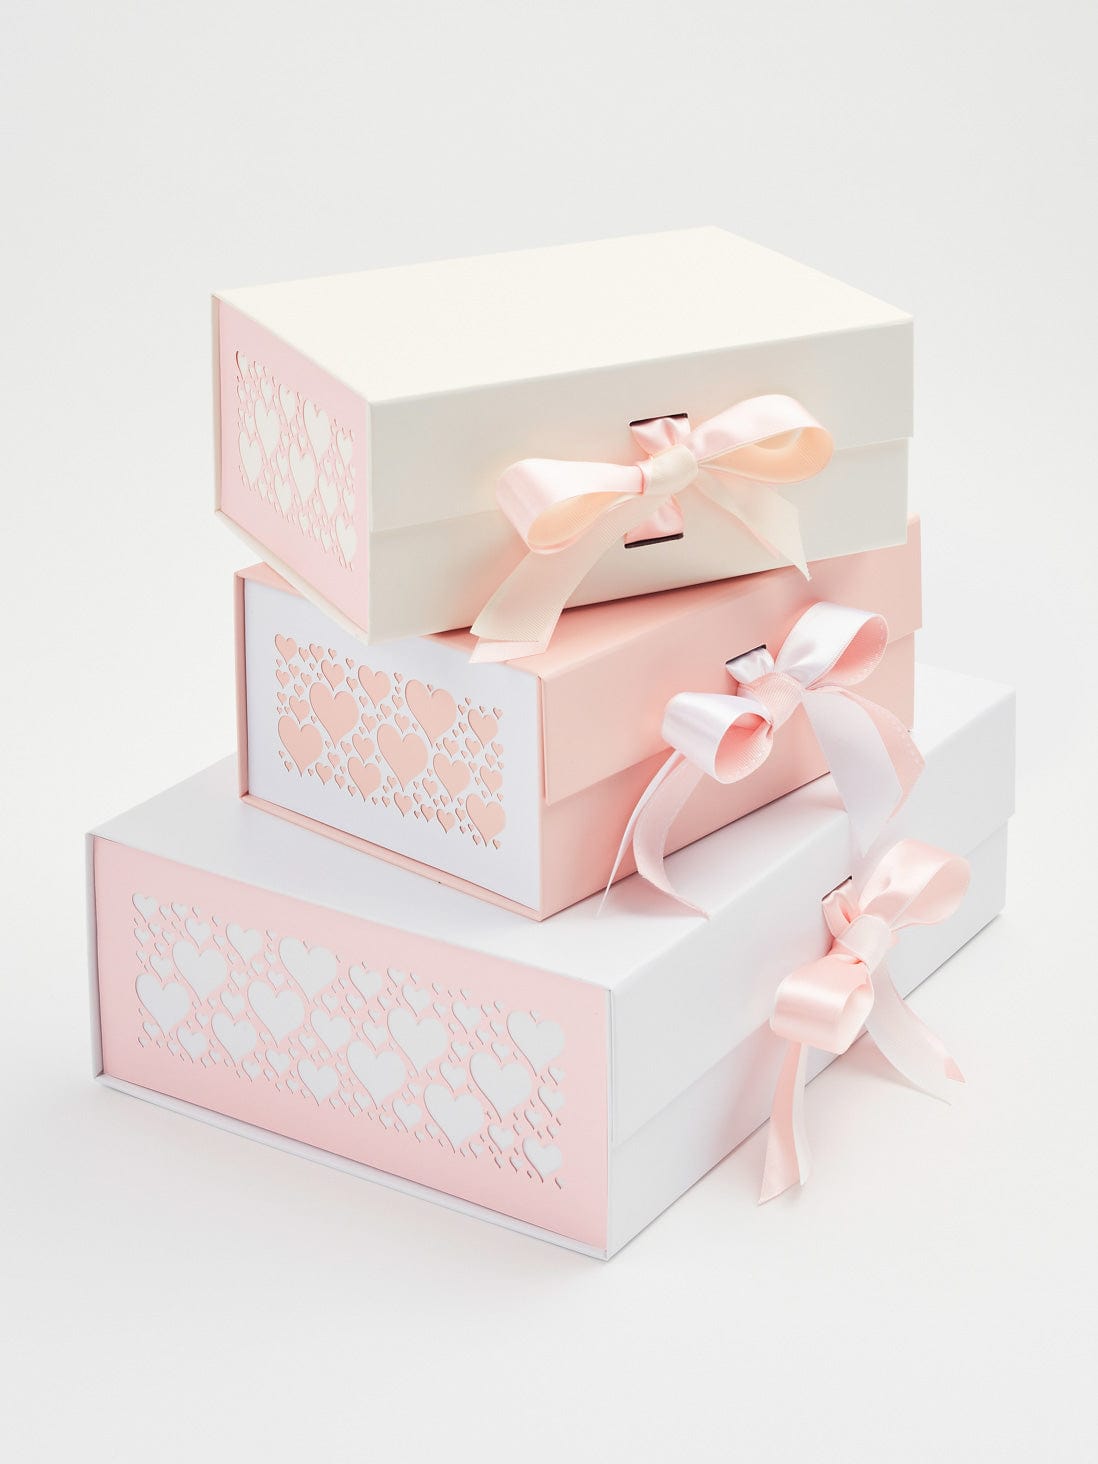 Pale Pink Hearts FAB Sides® Featured on Ivory Gift Box